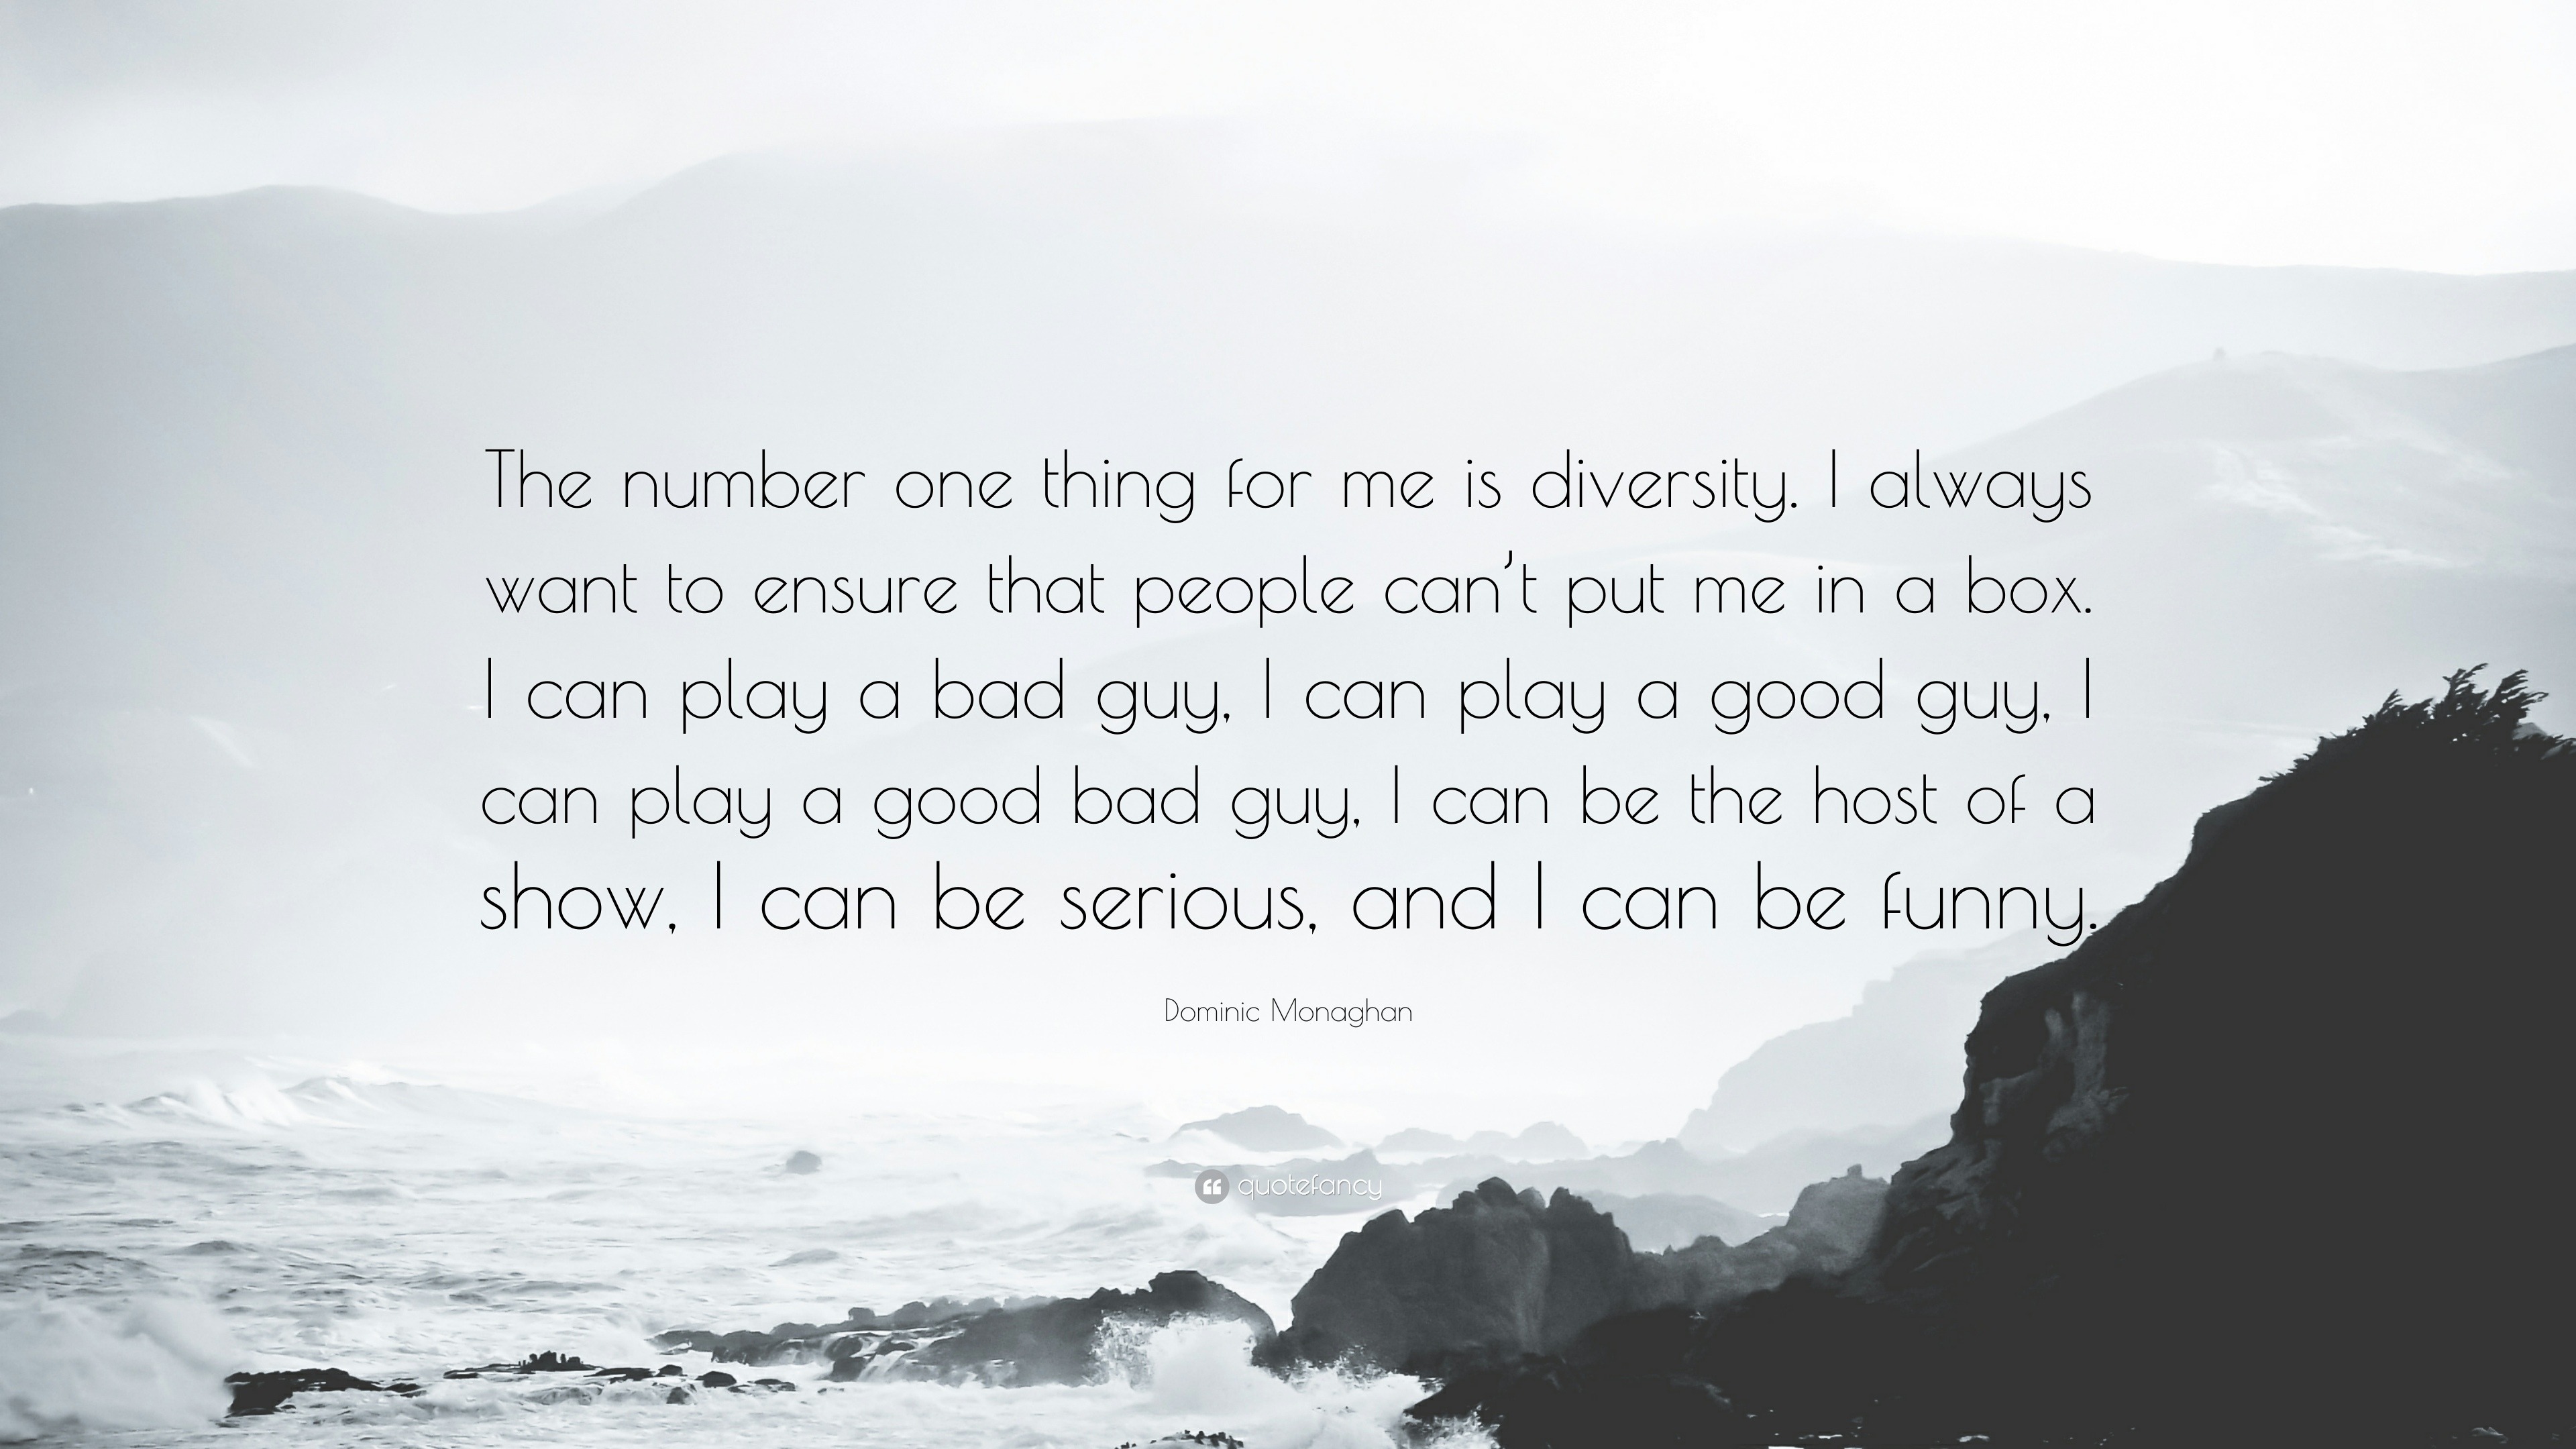 Dominic Monaghan Quote: “The number one thing for me is diversity. I always  want to ensure that people can't put me in a box. I can play a bad gu...”